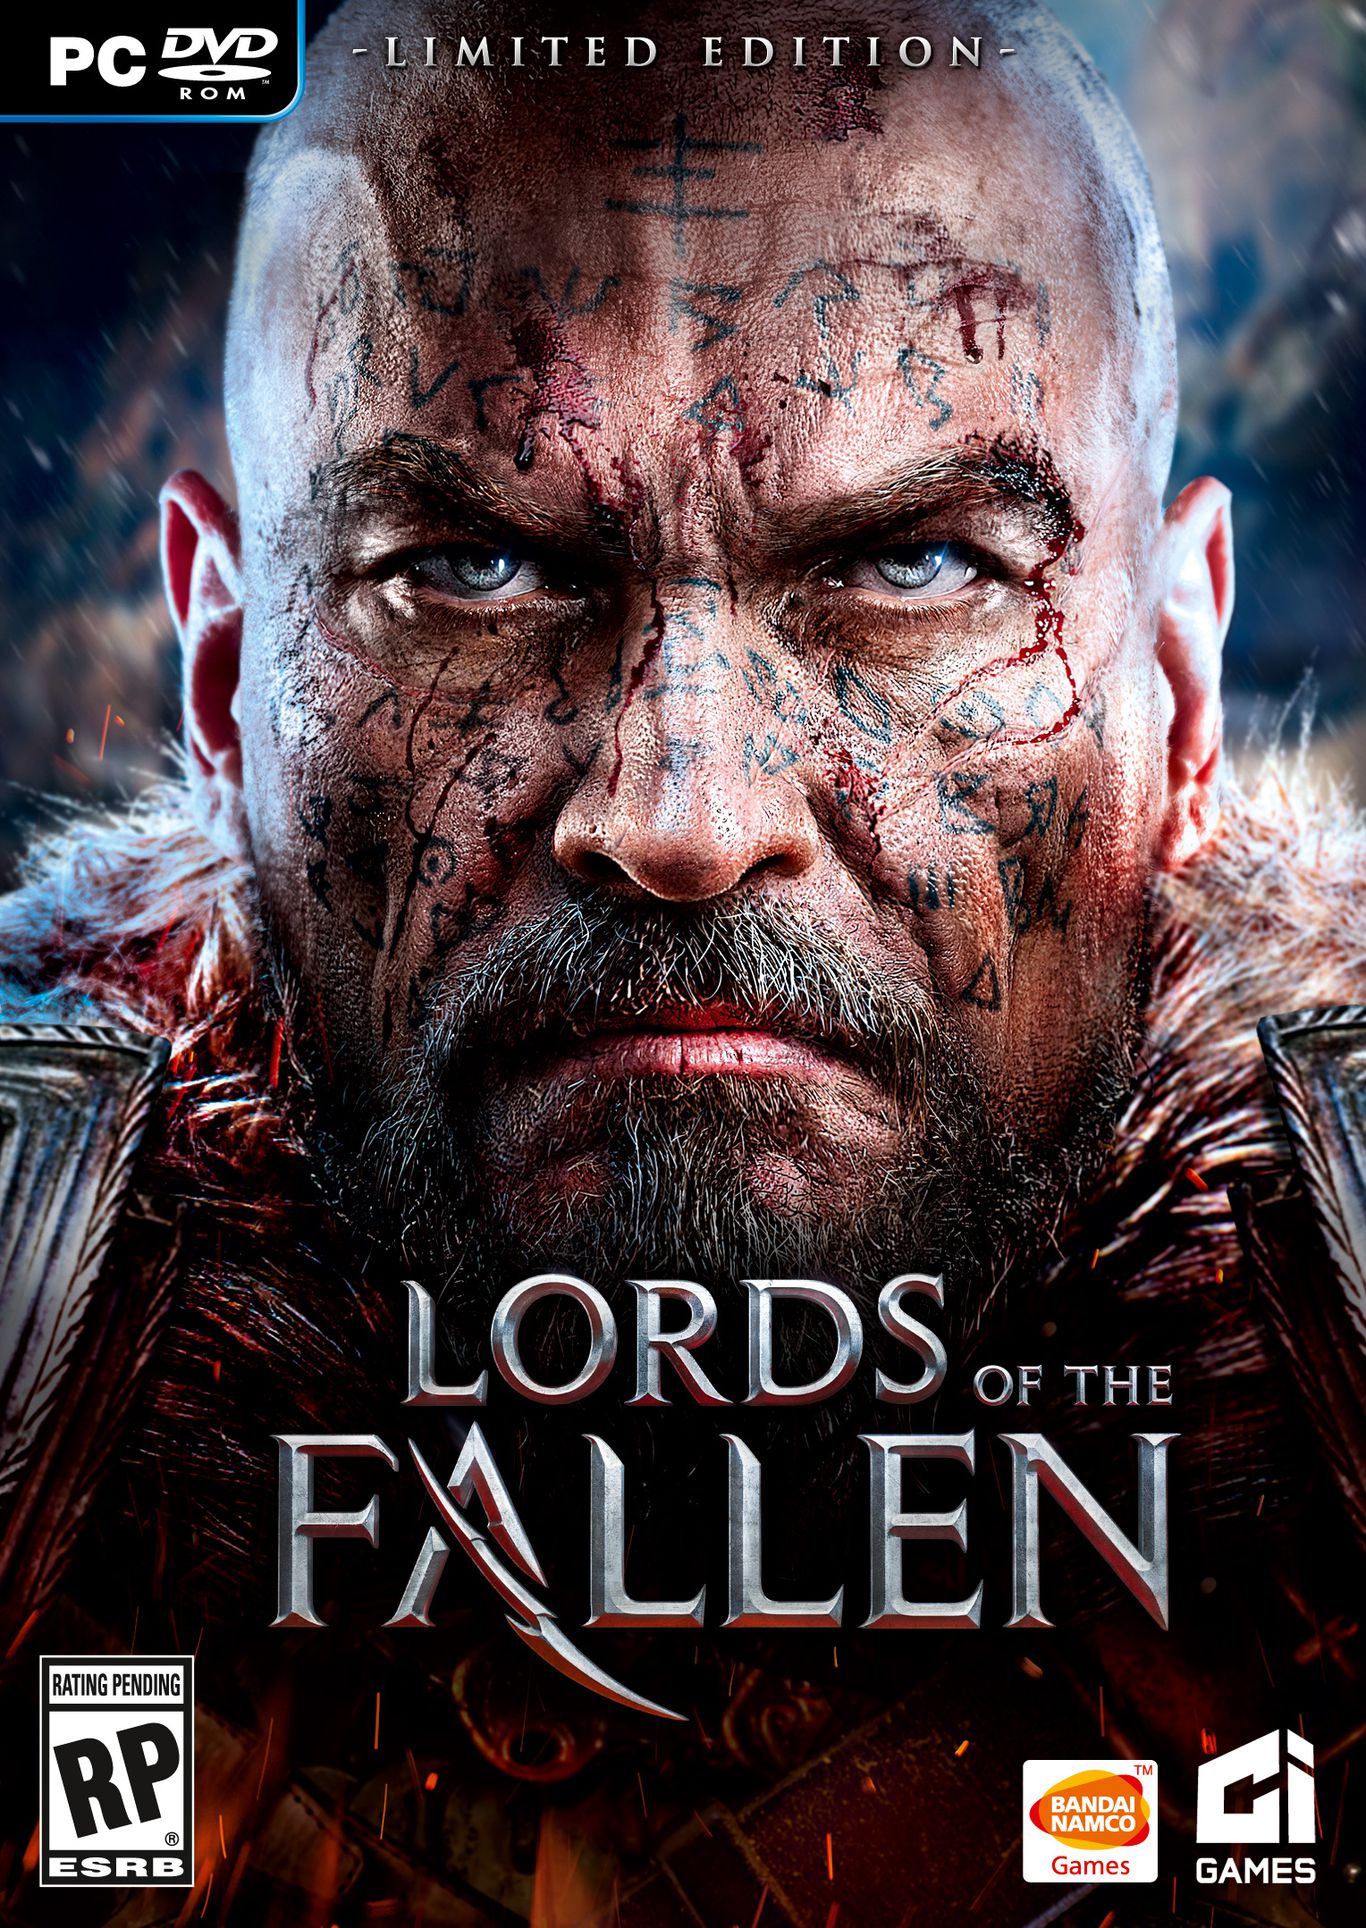 Lords Of The Fallen Digital Deluxe Edition - RG GAMERS (2013)